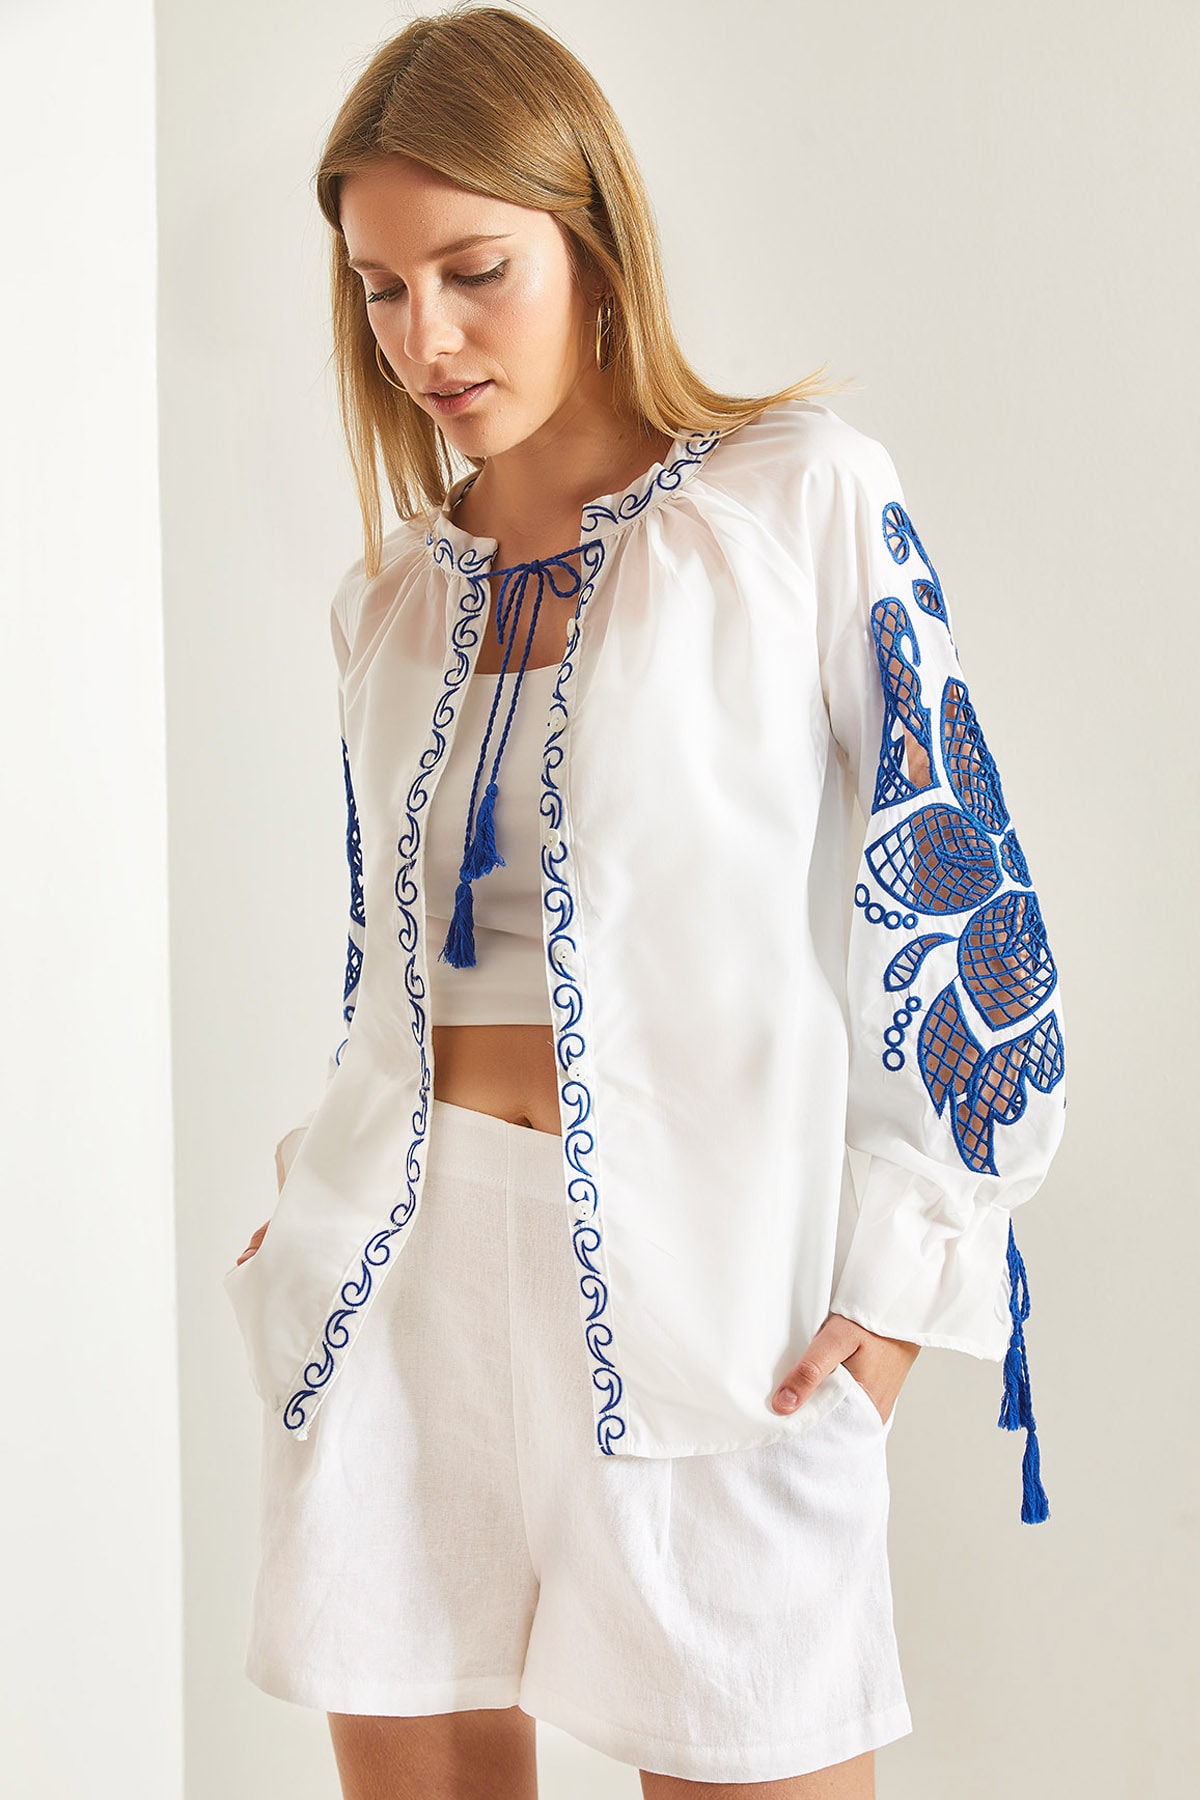 Levně Bianco Lucci Women's Tie Collar Embroidered Loose Shirt.